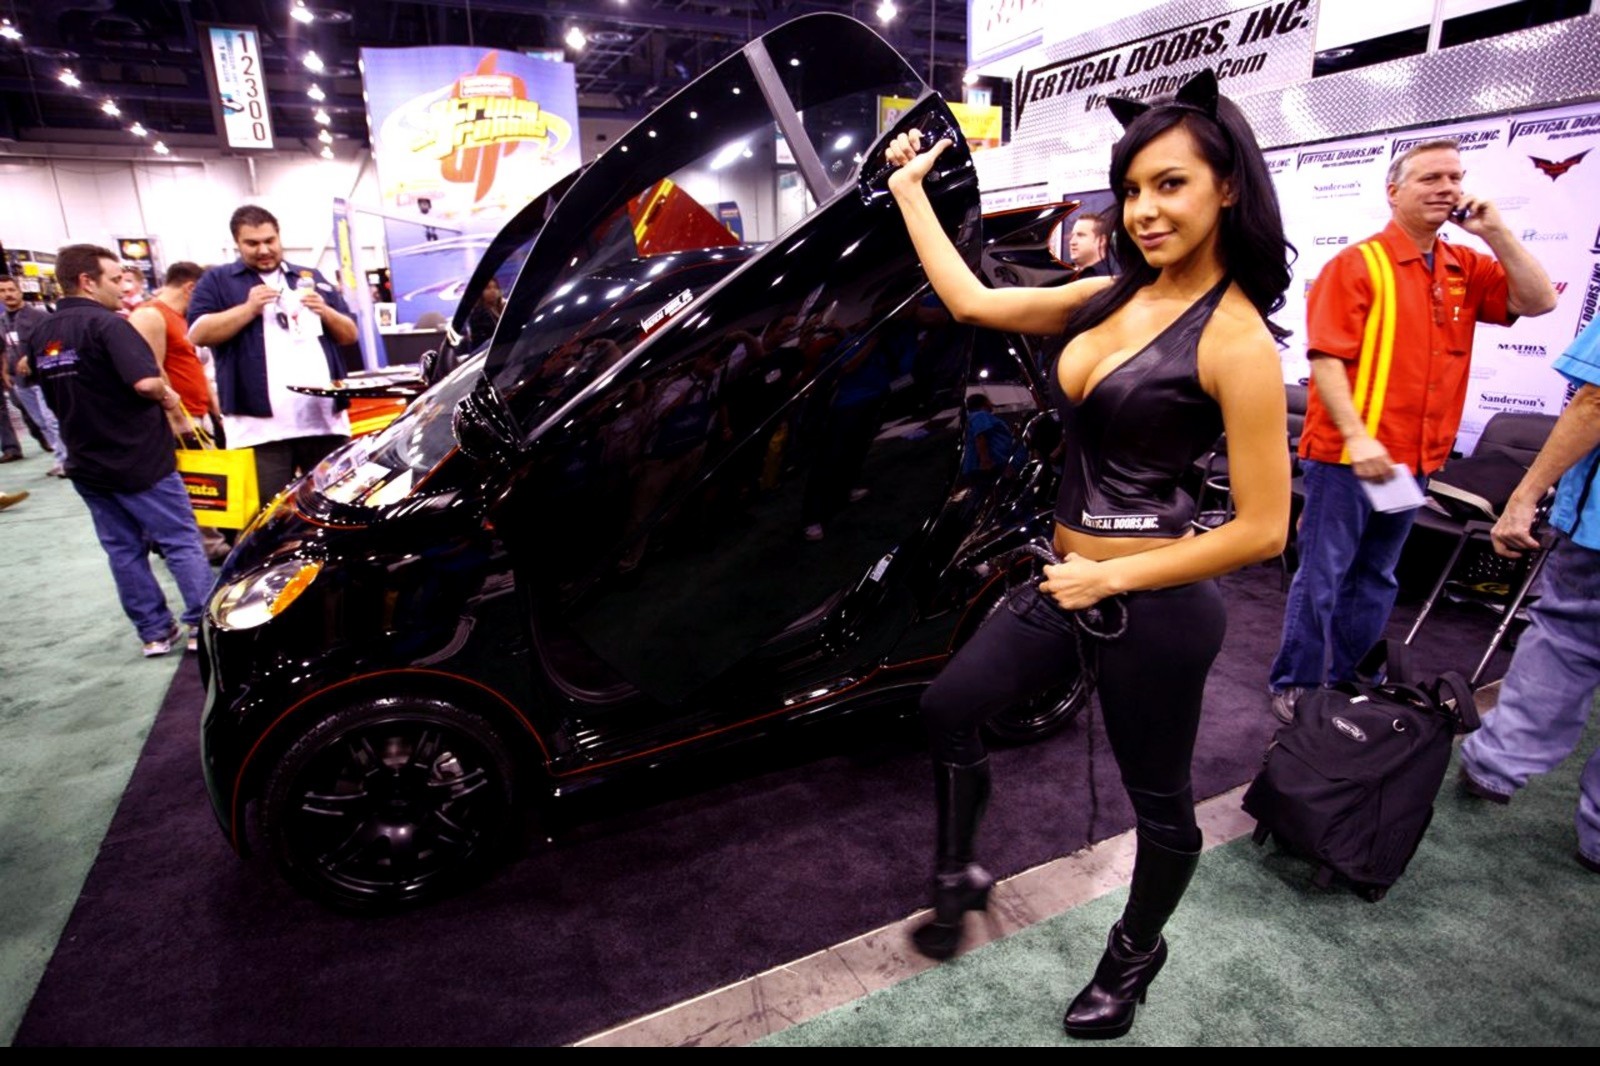 People 1600x1066 car women with cars promomodels women black clothing cat ears cleavage vehicle boobs standing black cars looking at viewer